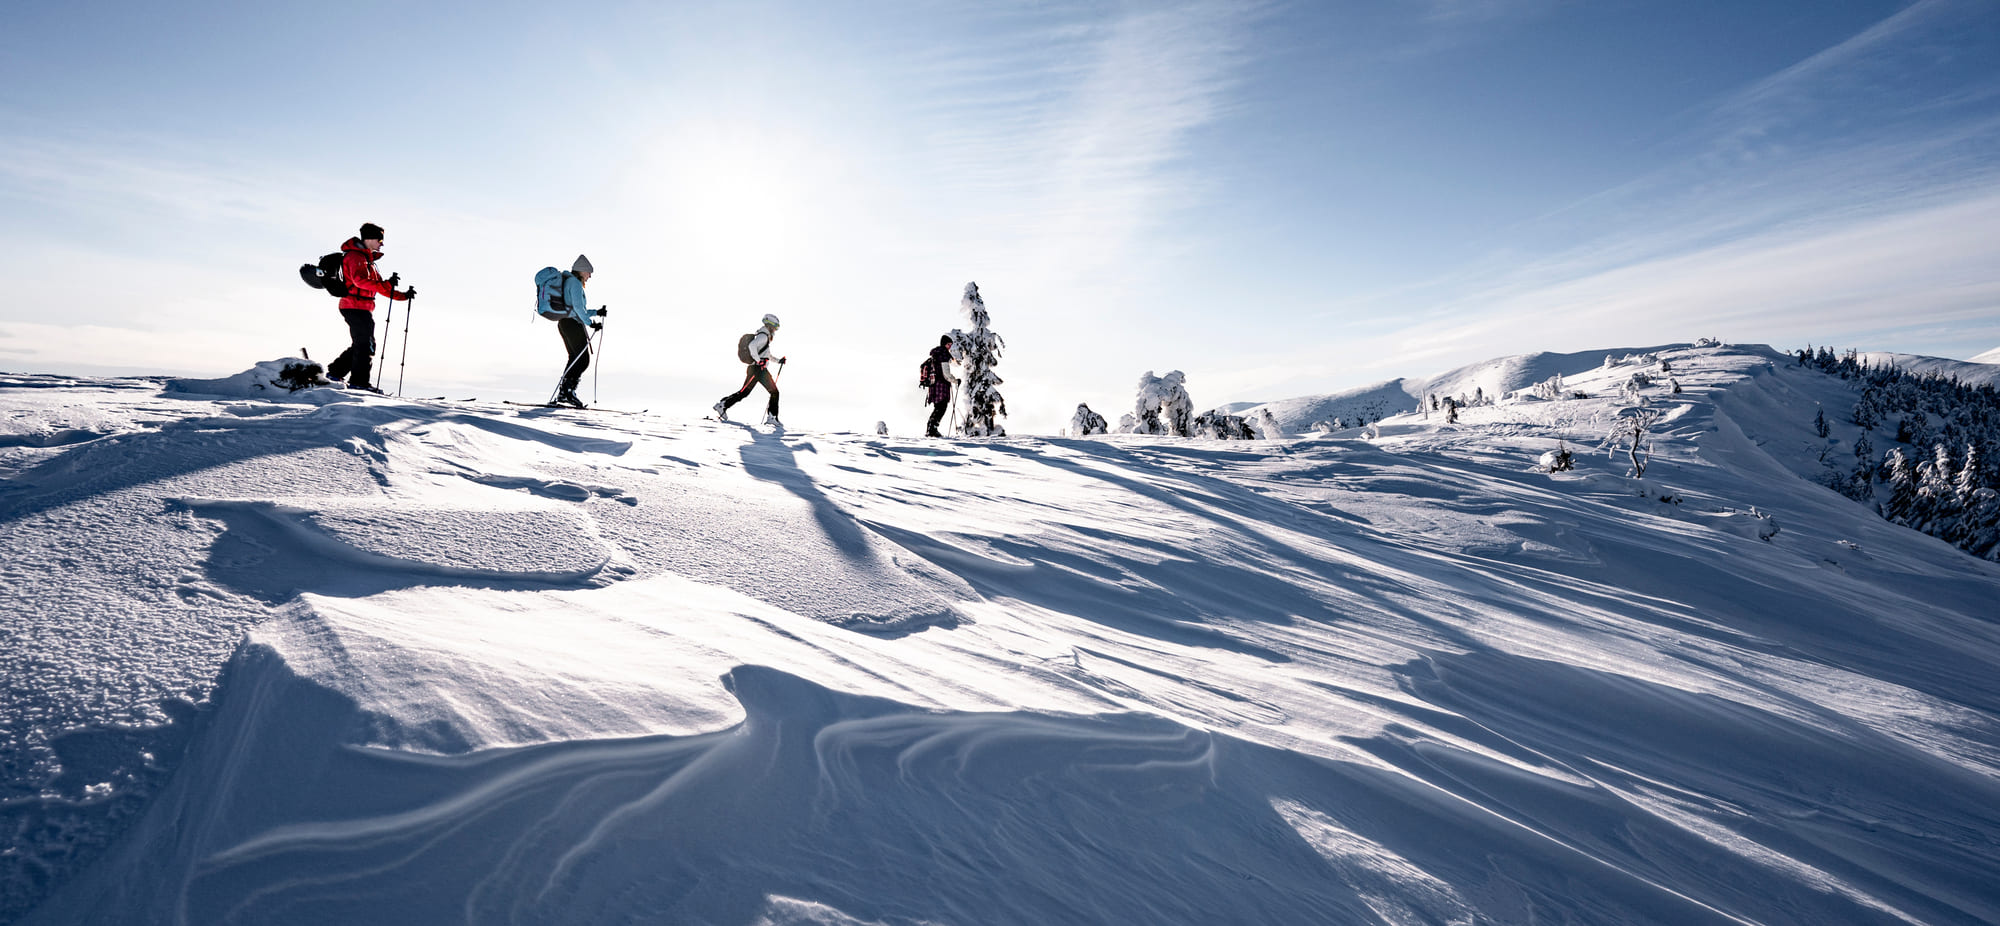 Skiers walking on the edge of a snowy mountain